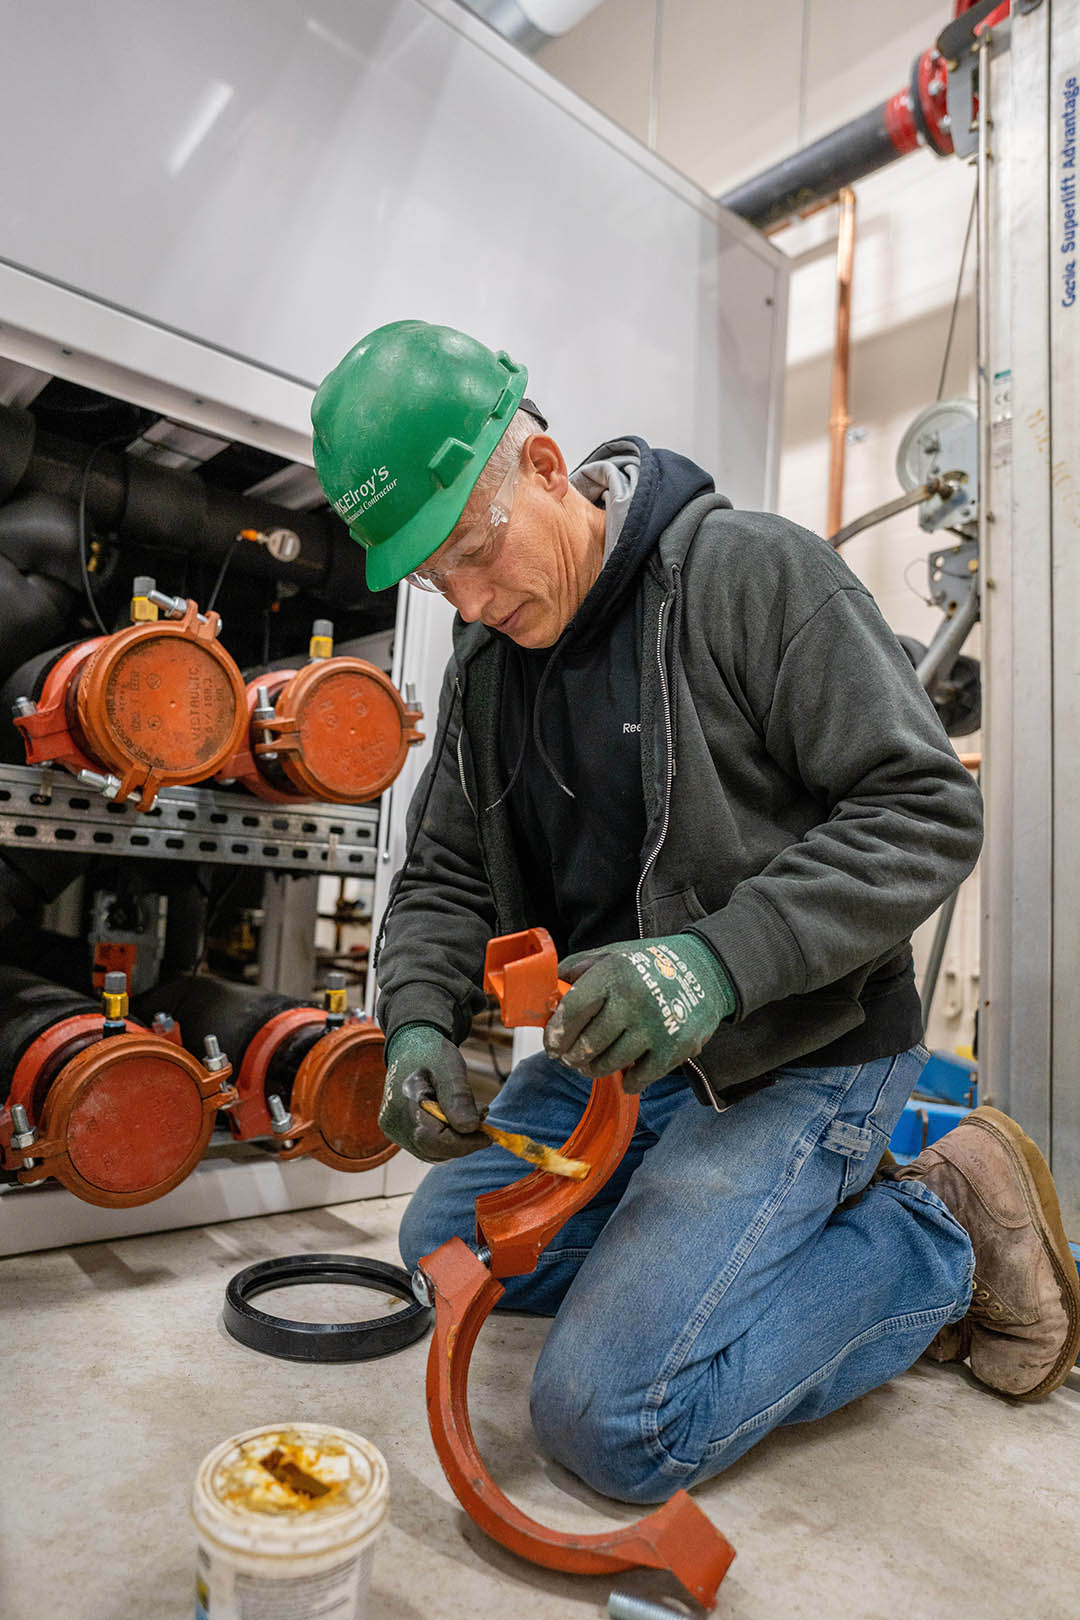 Jim Konrade of McElroy’s applies lubricant to help seat a gasket in a Victaulic pipe fitting at a medical facility expansion.